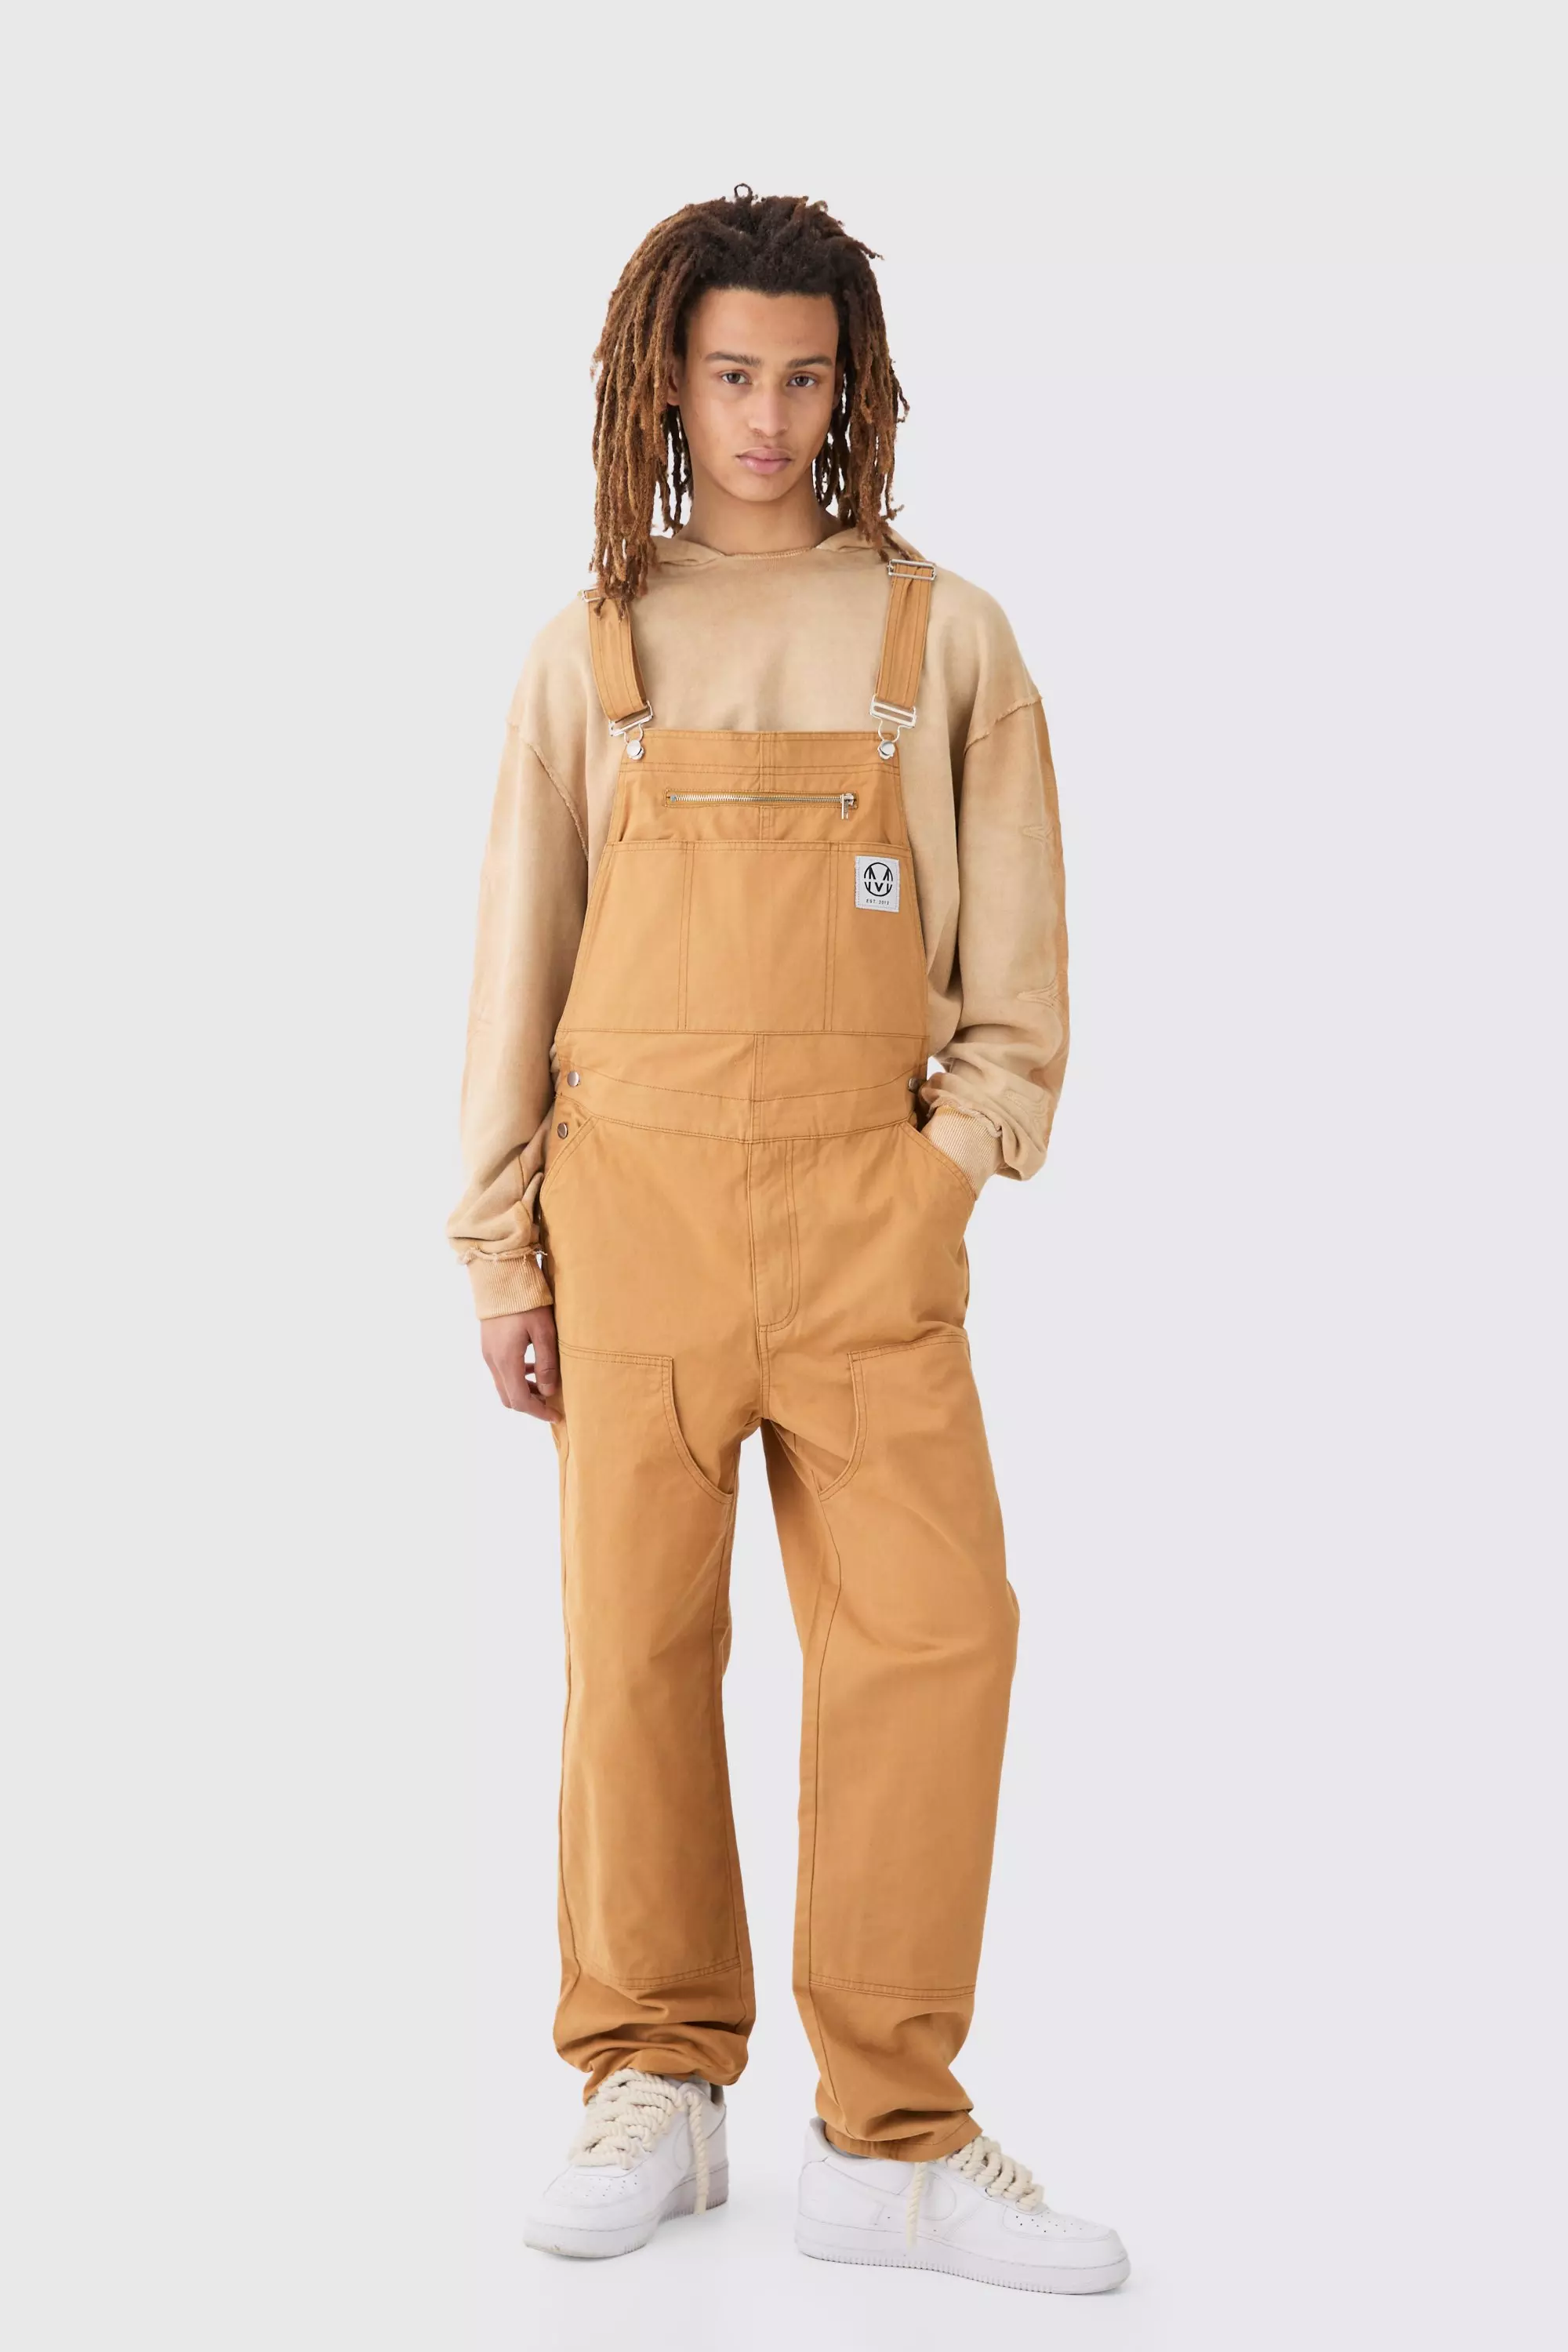 Washed Twill Branded Zip Carpenter Relaxed Fit Dungarees Tan